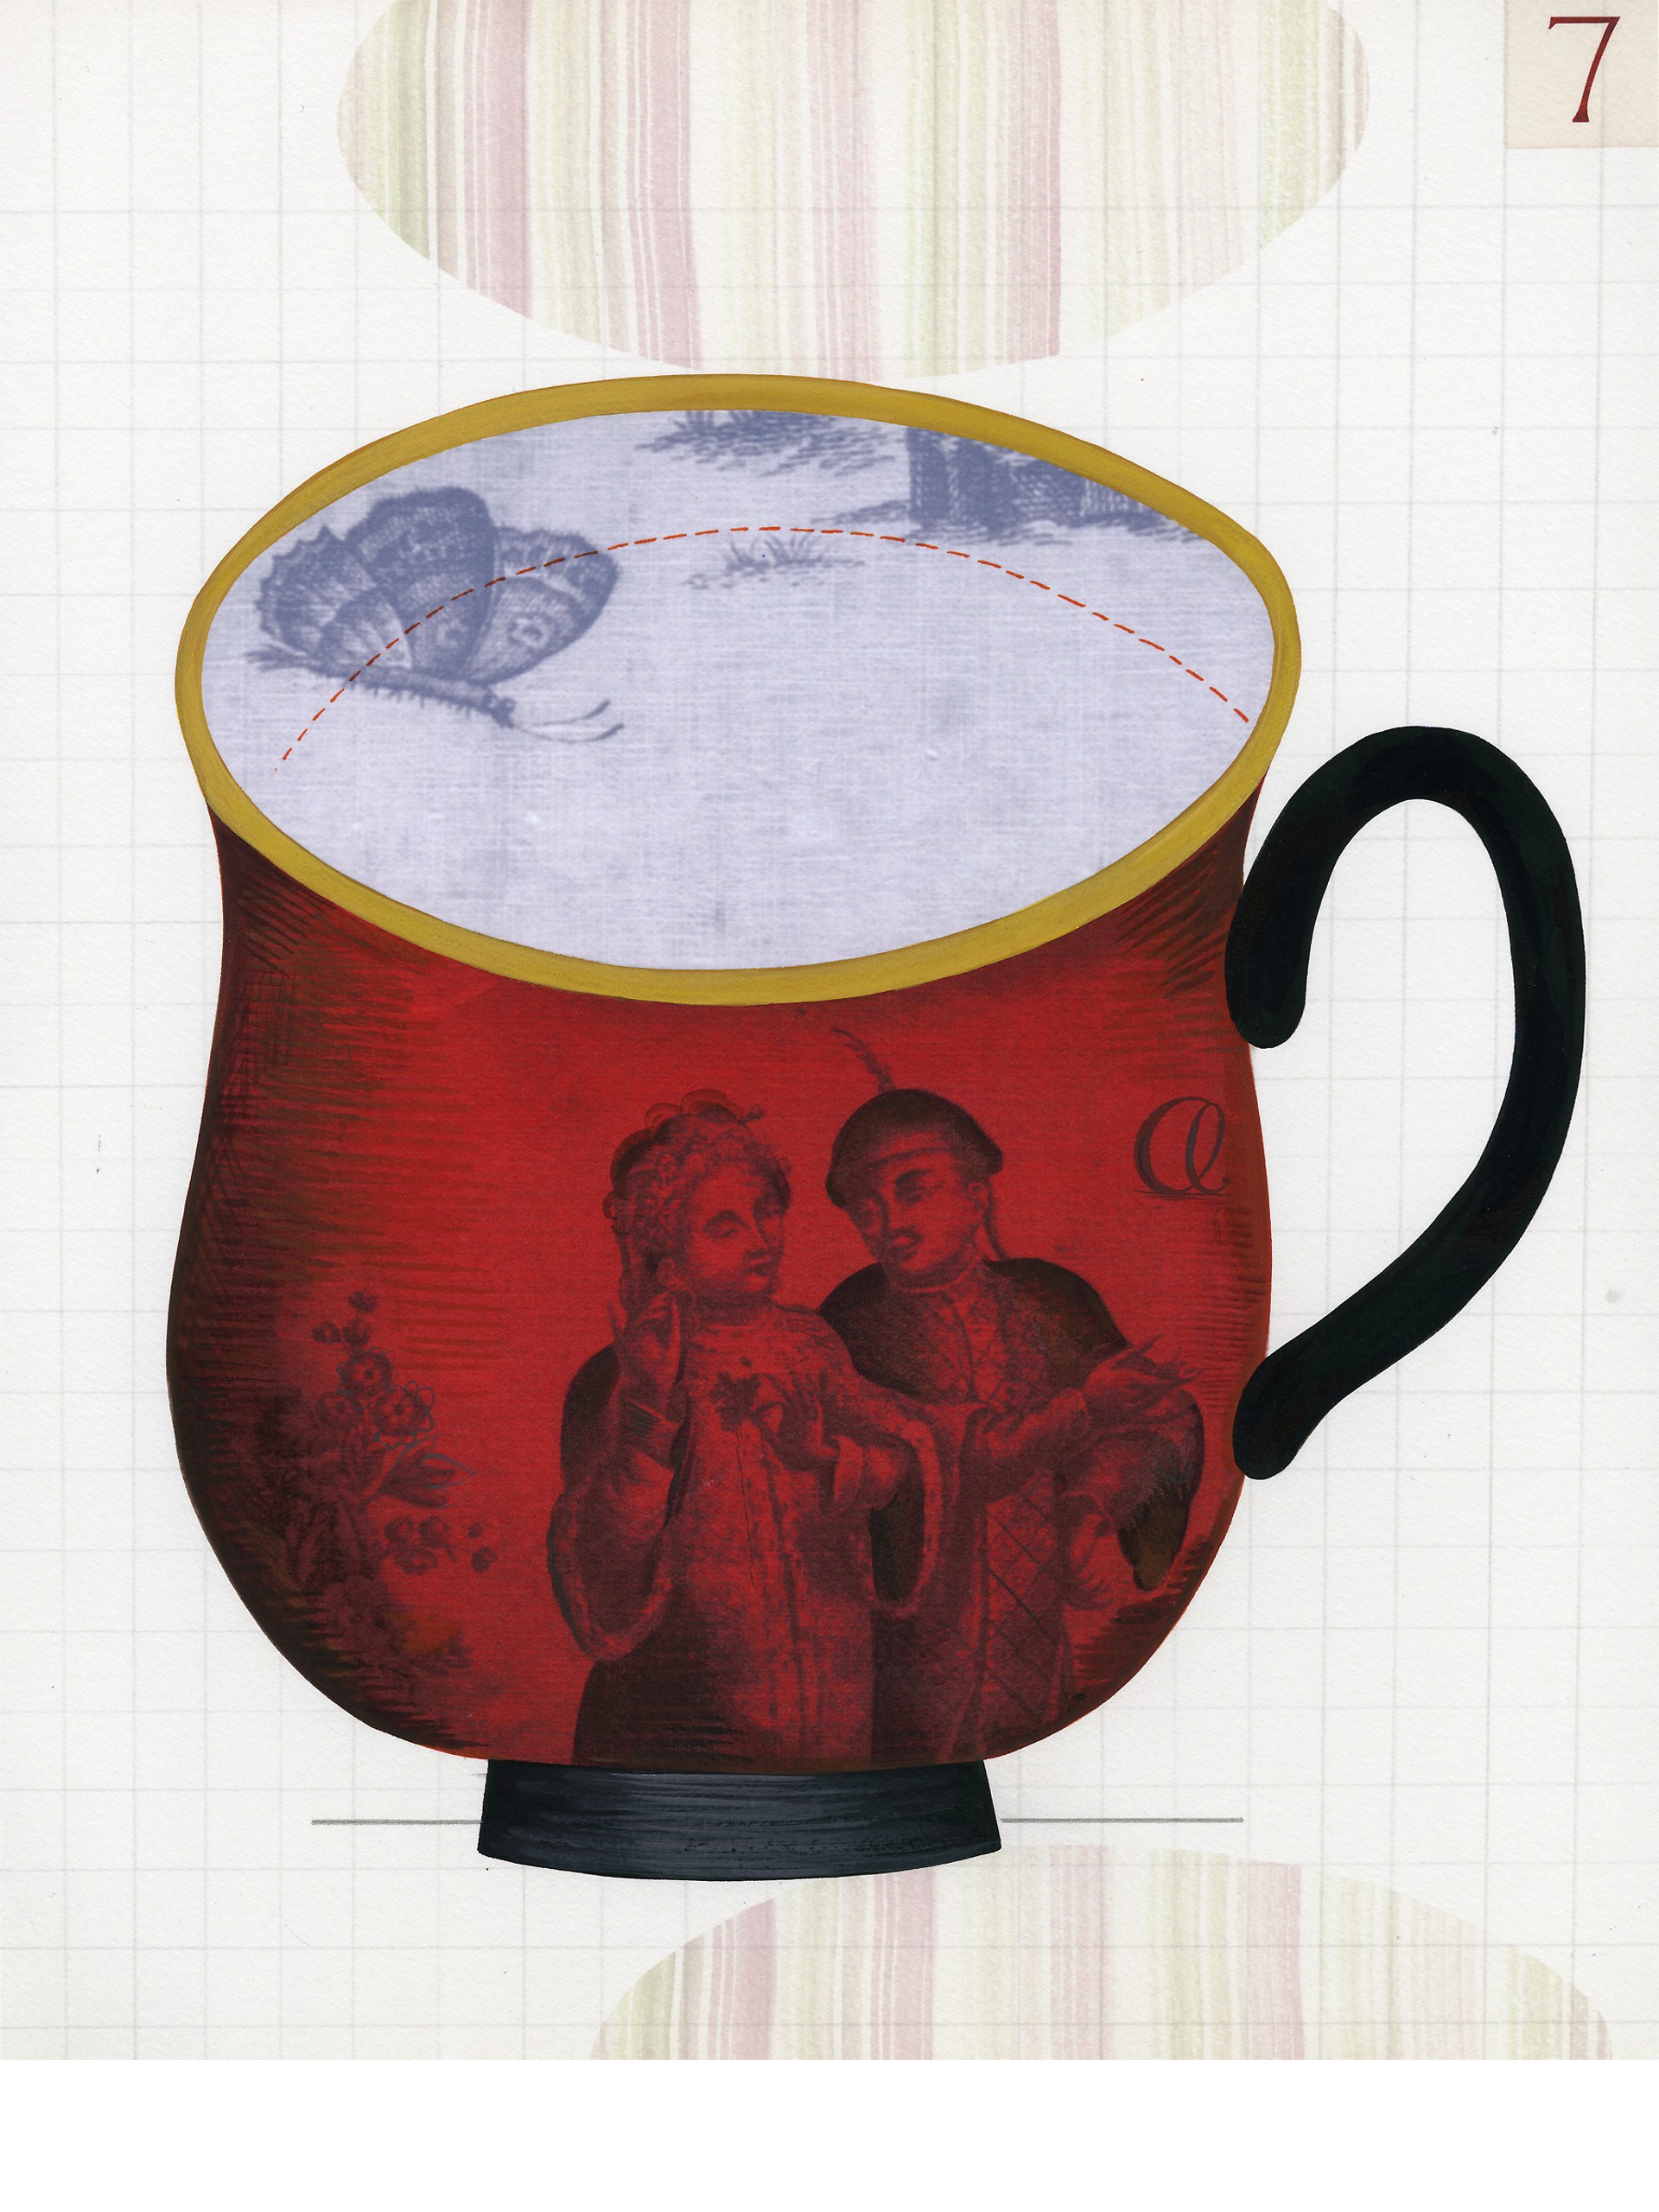 Cup No. 7 by Anne Smith